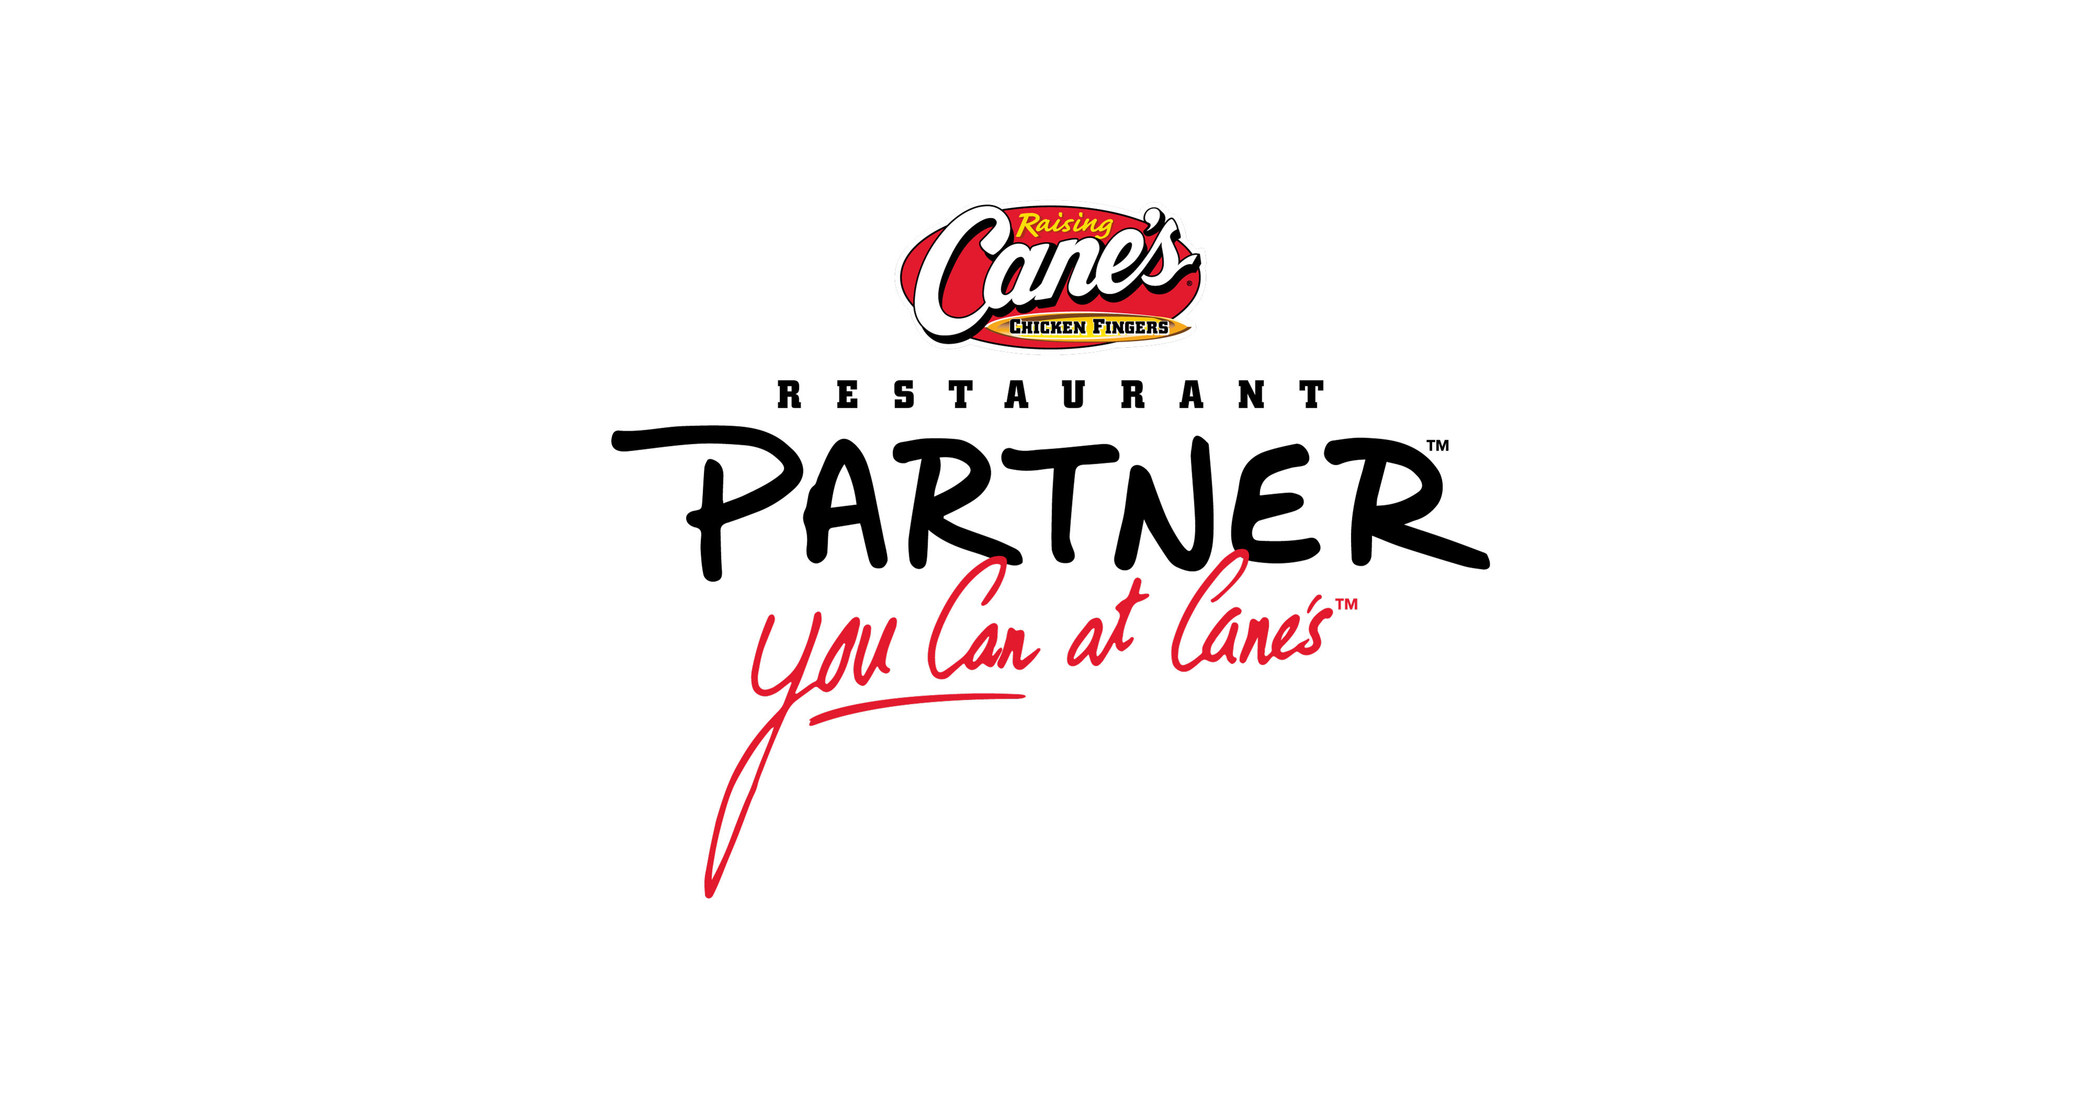 Raising Cane's River Center launches clear bag policy